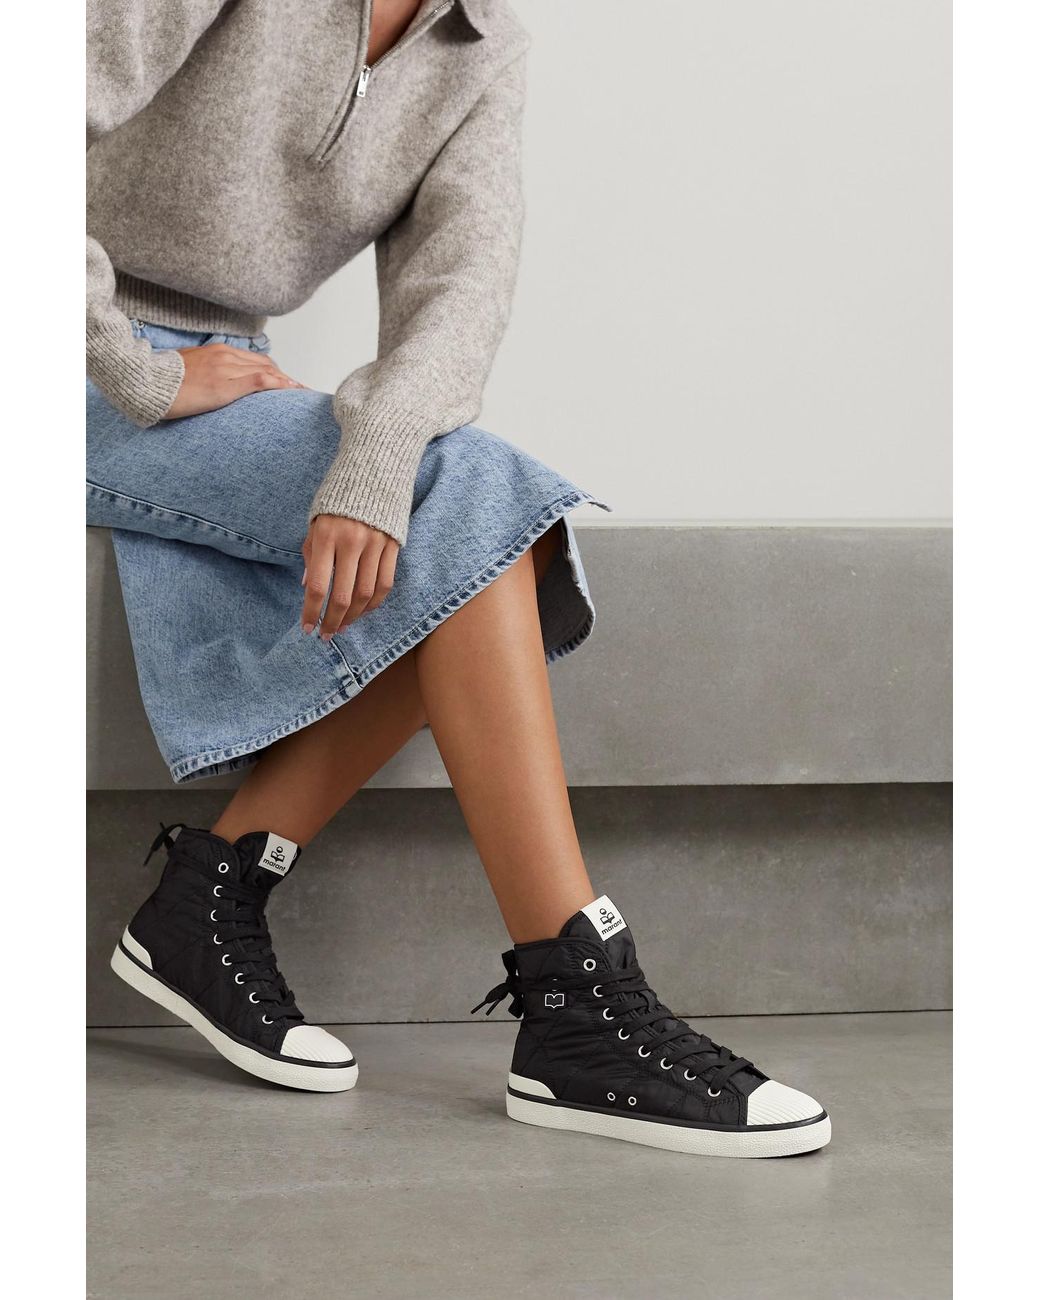 Isabel Marant Benkeen Quilted Shell High-top Sneakers in Black | Lyst